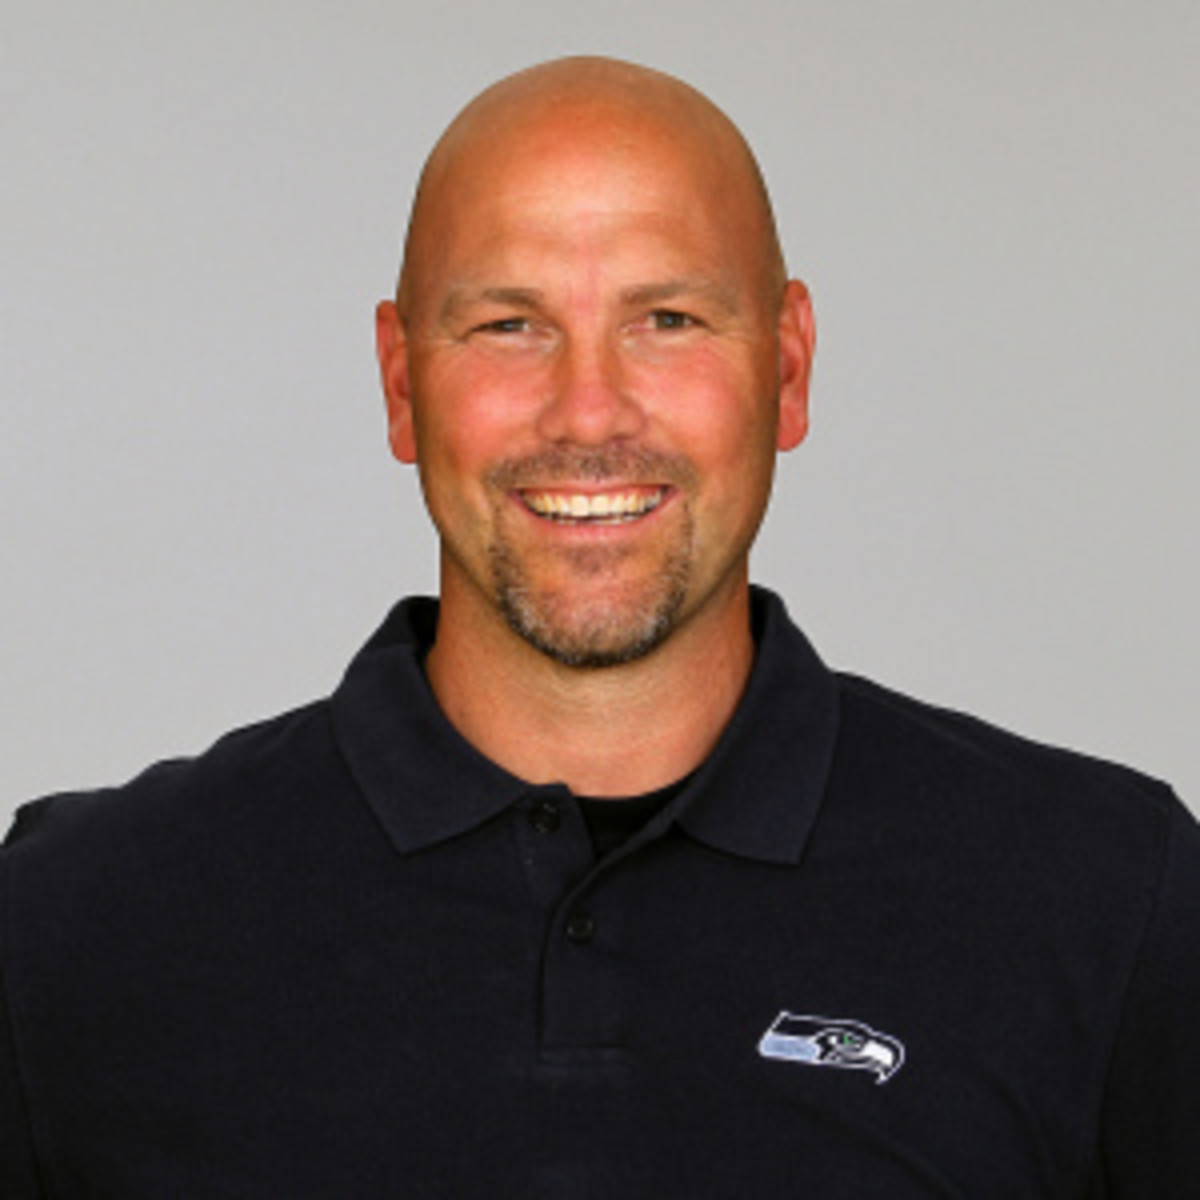 Seattle Seahawks defensive coordinator Gus Bradley is the new coach for the Jaguars. (Getty Images)